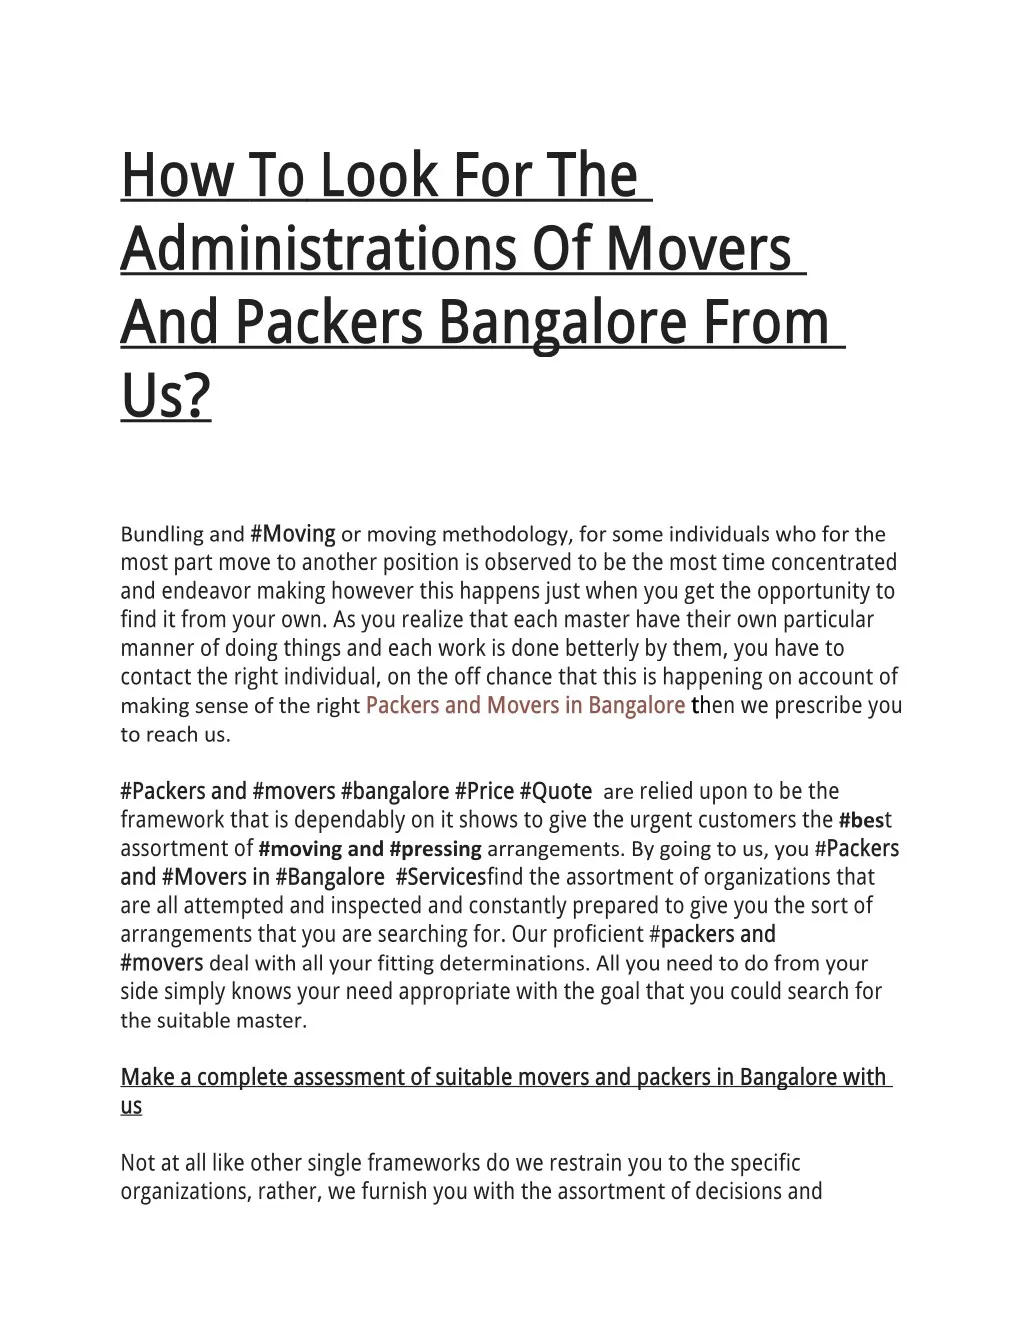 how to look for the administrations of movers